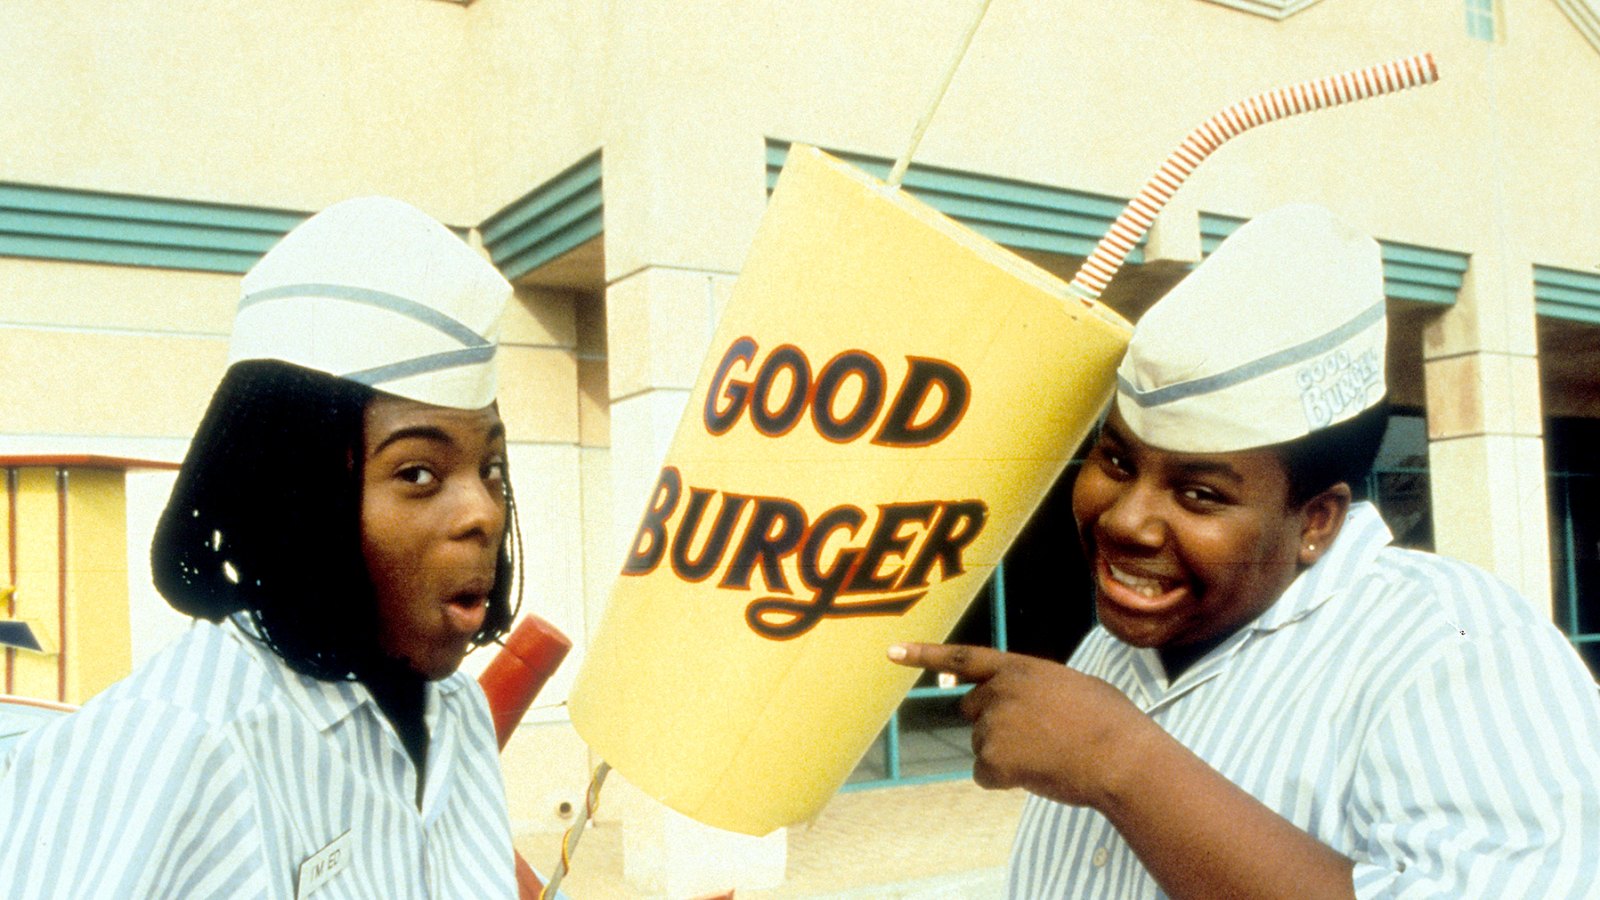 Kel Mitchell and Kenan Thompson in 'Good Burger', 1997.